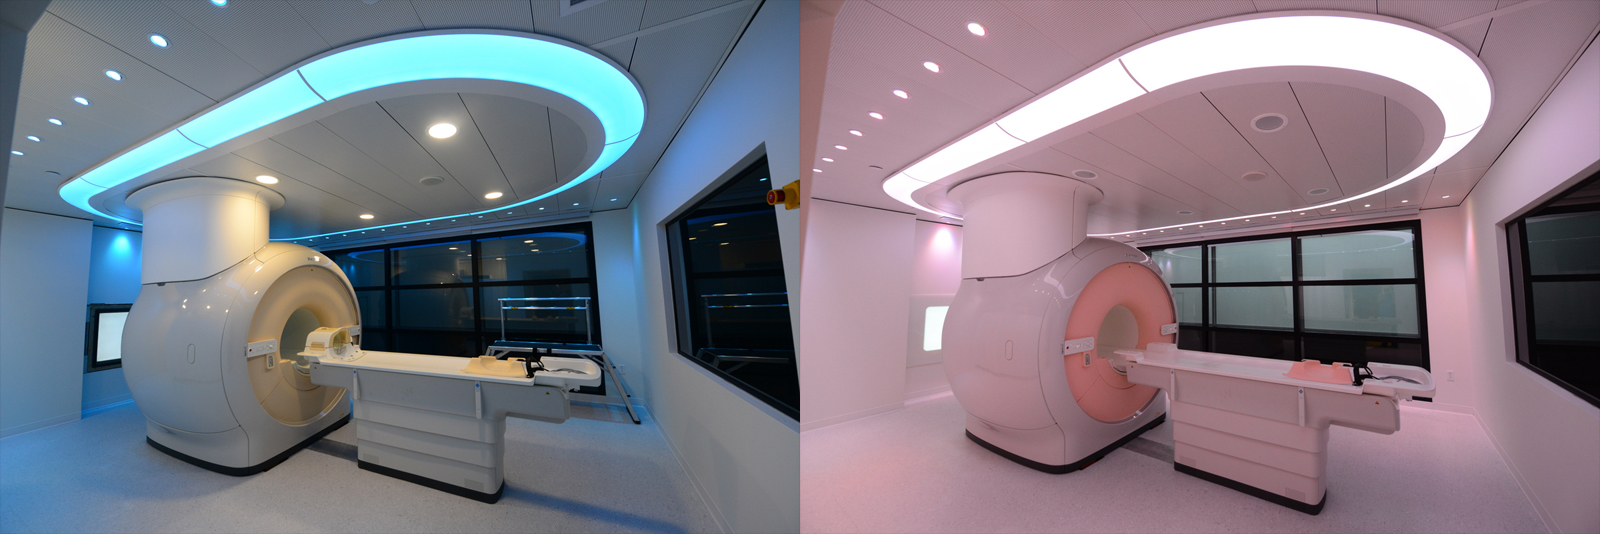 Beaverton MRI with patient's choice of ambient lighting